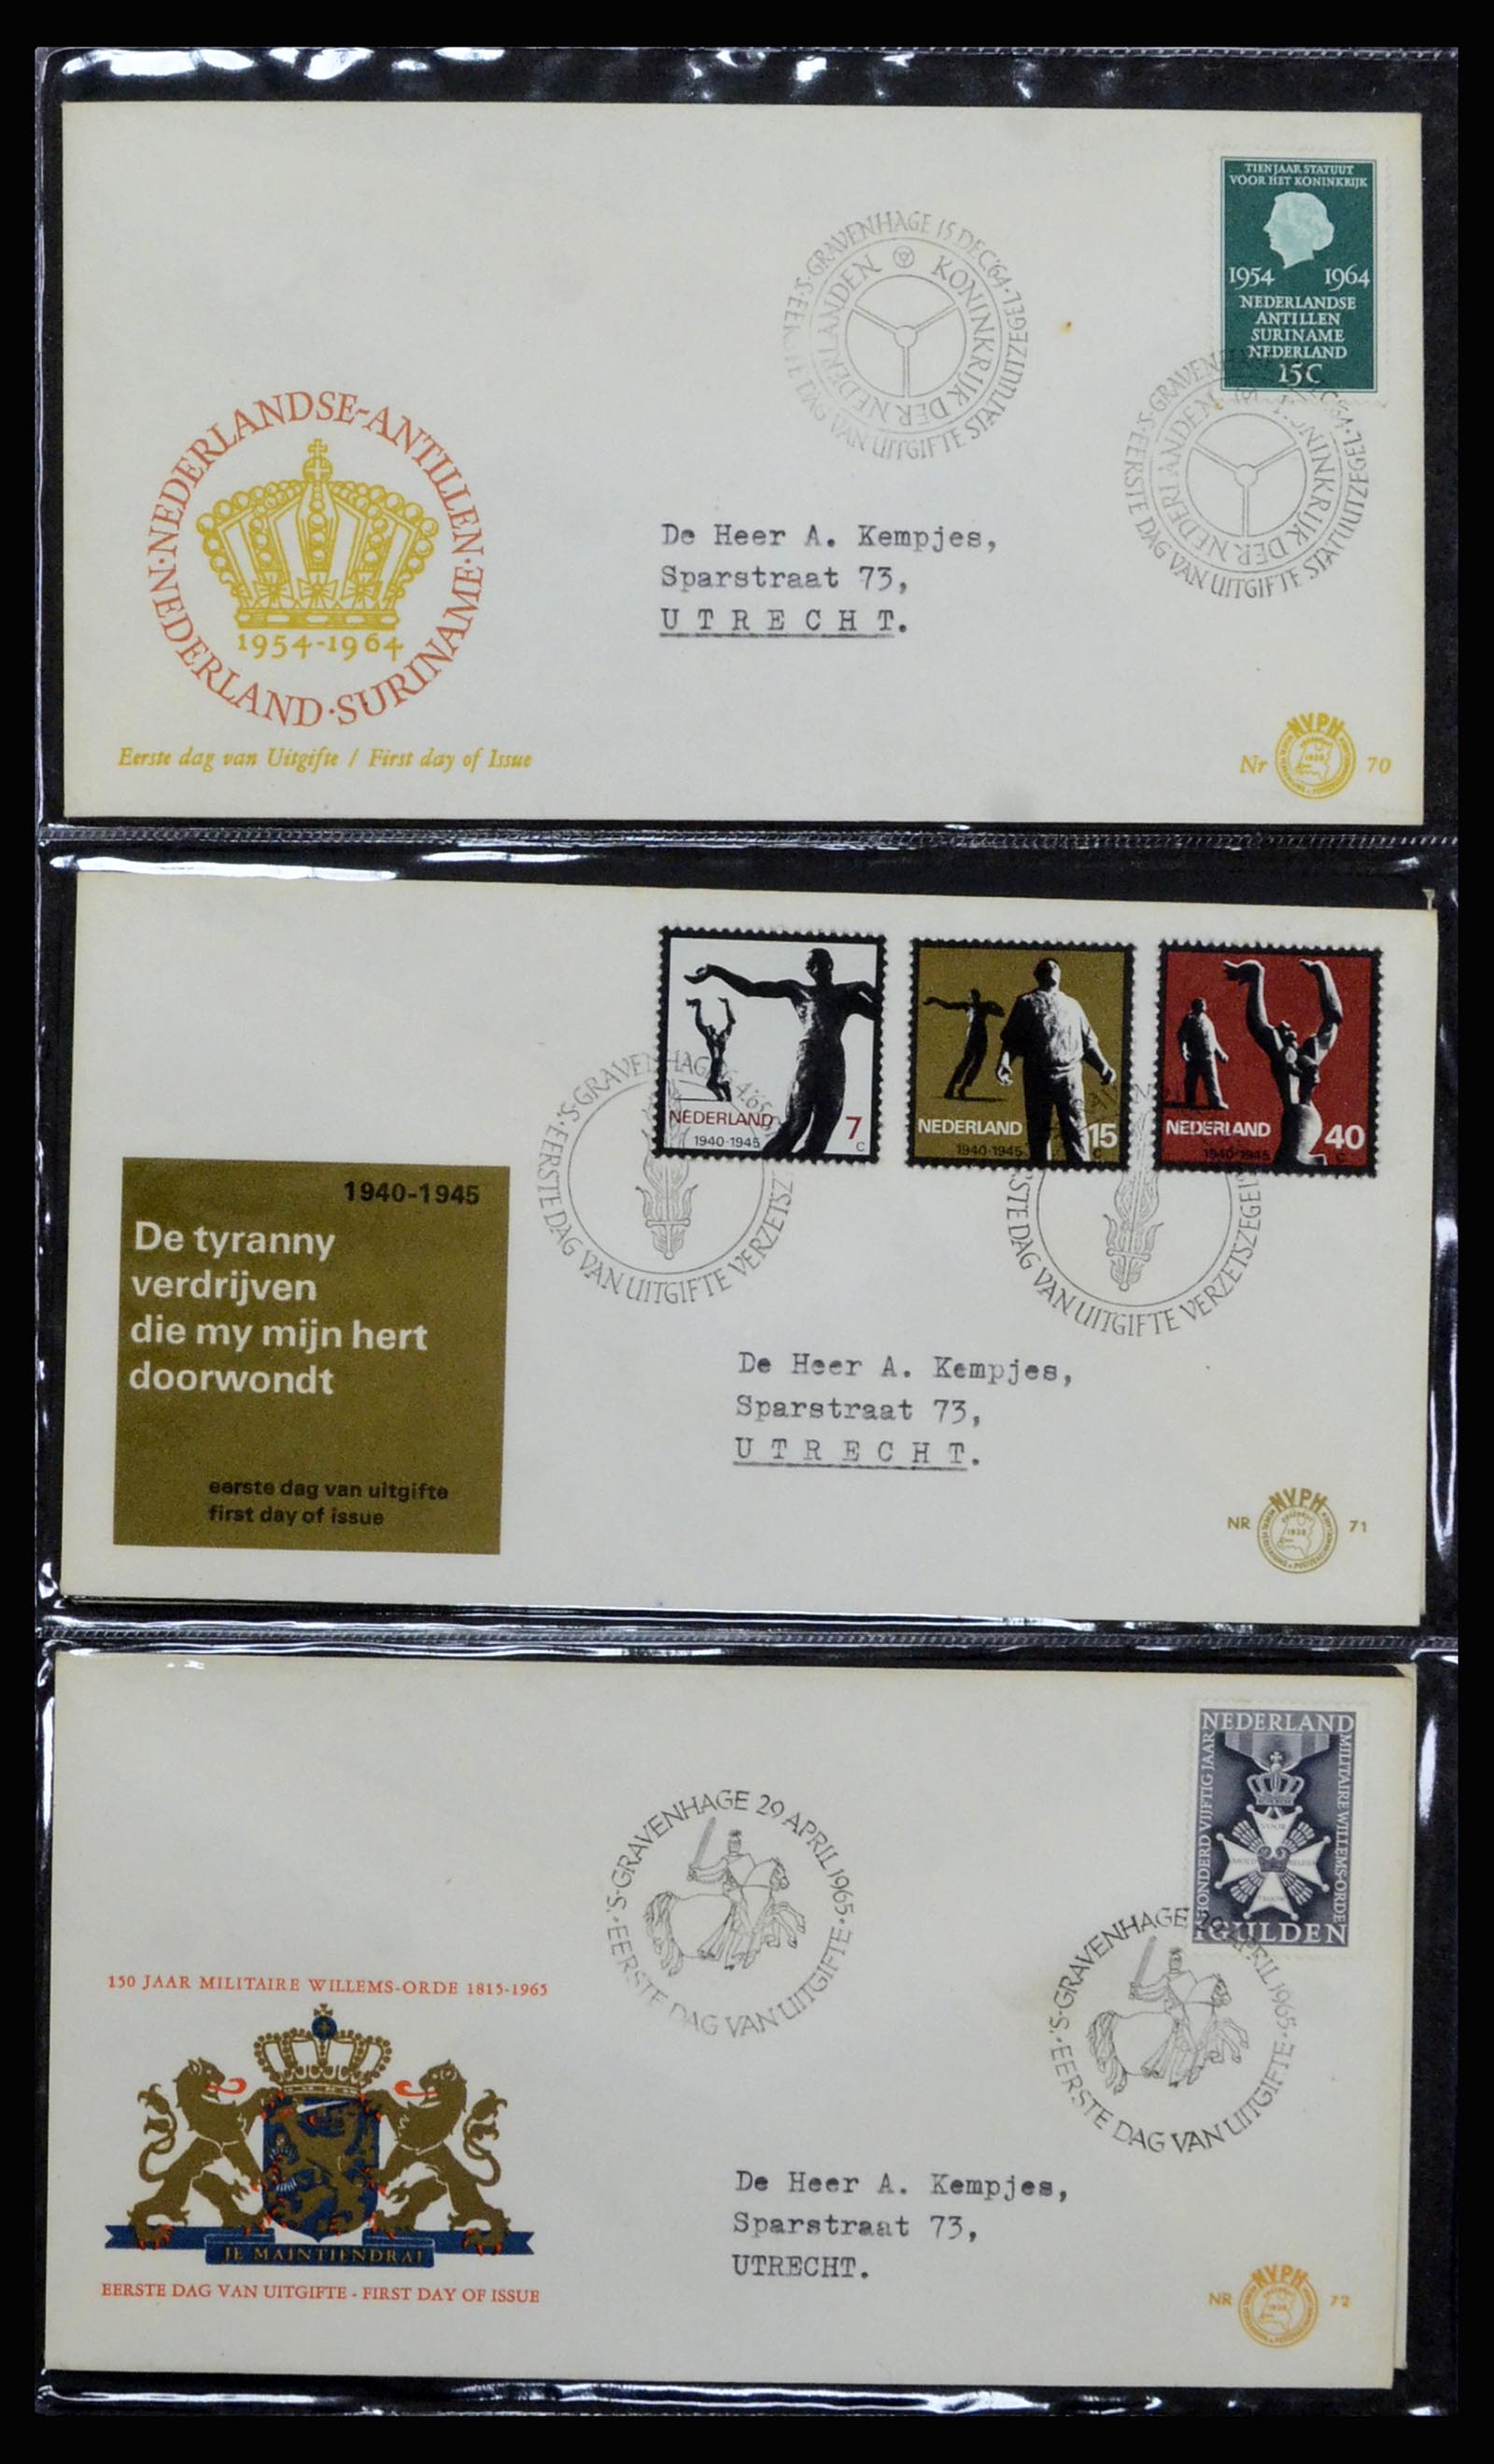 37197 025 - Stamp collection 37197 Netherlands FDC's 1950-2004.